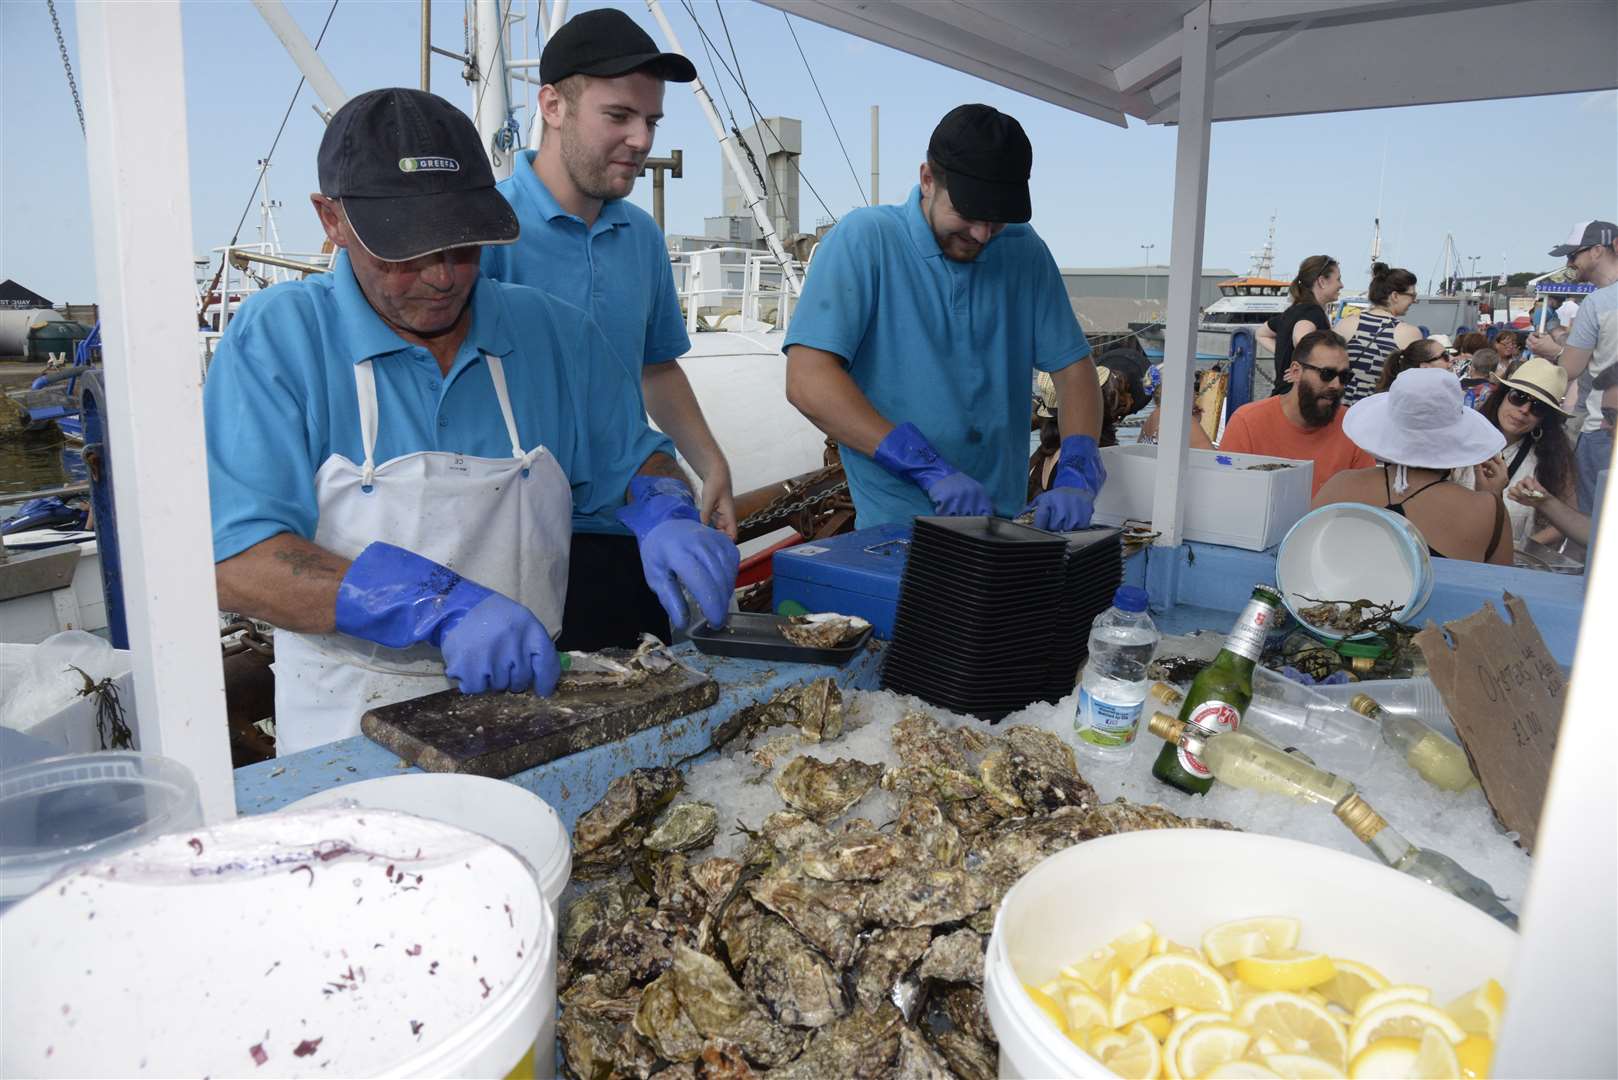 Could the Oyster Festival no longer be held?